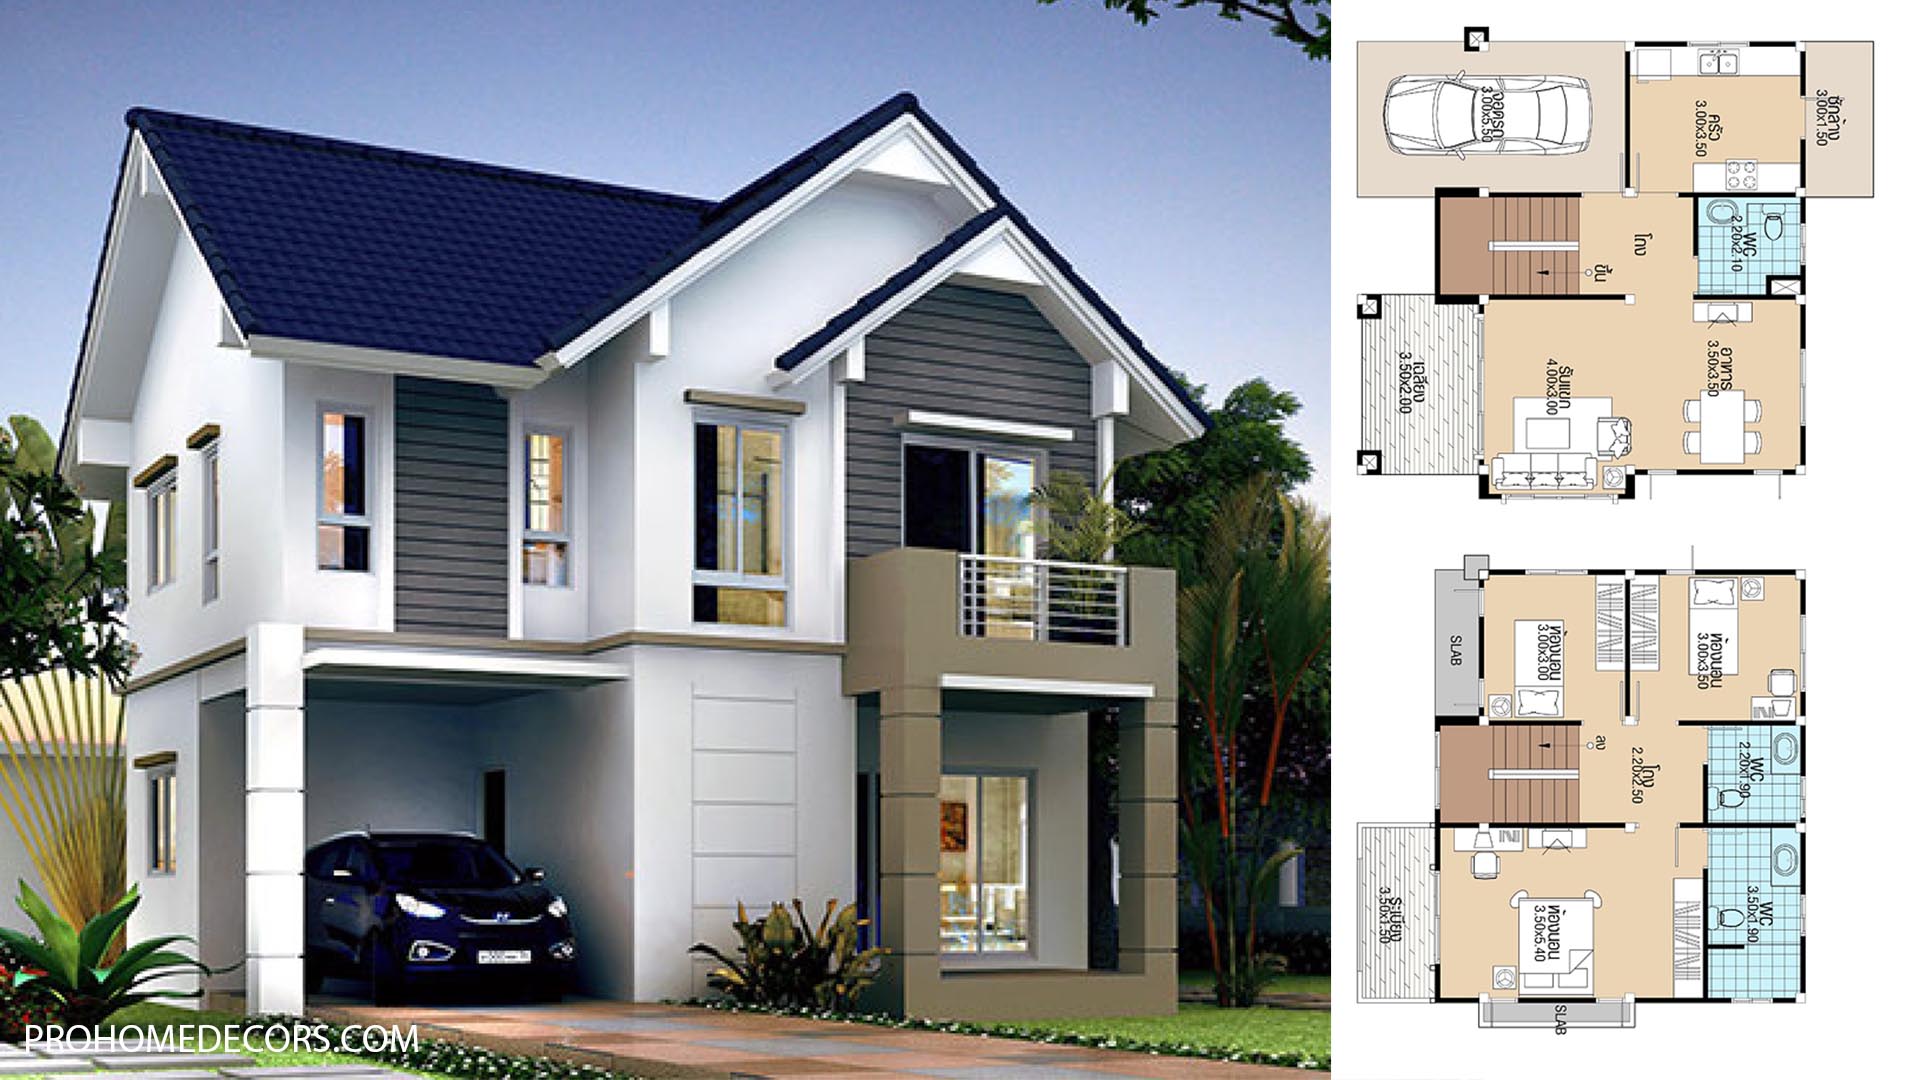 House Plans 9.2x8.5 with 3 Bedrooms